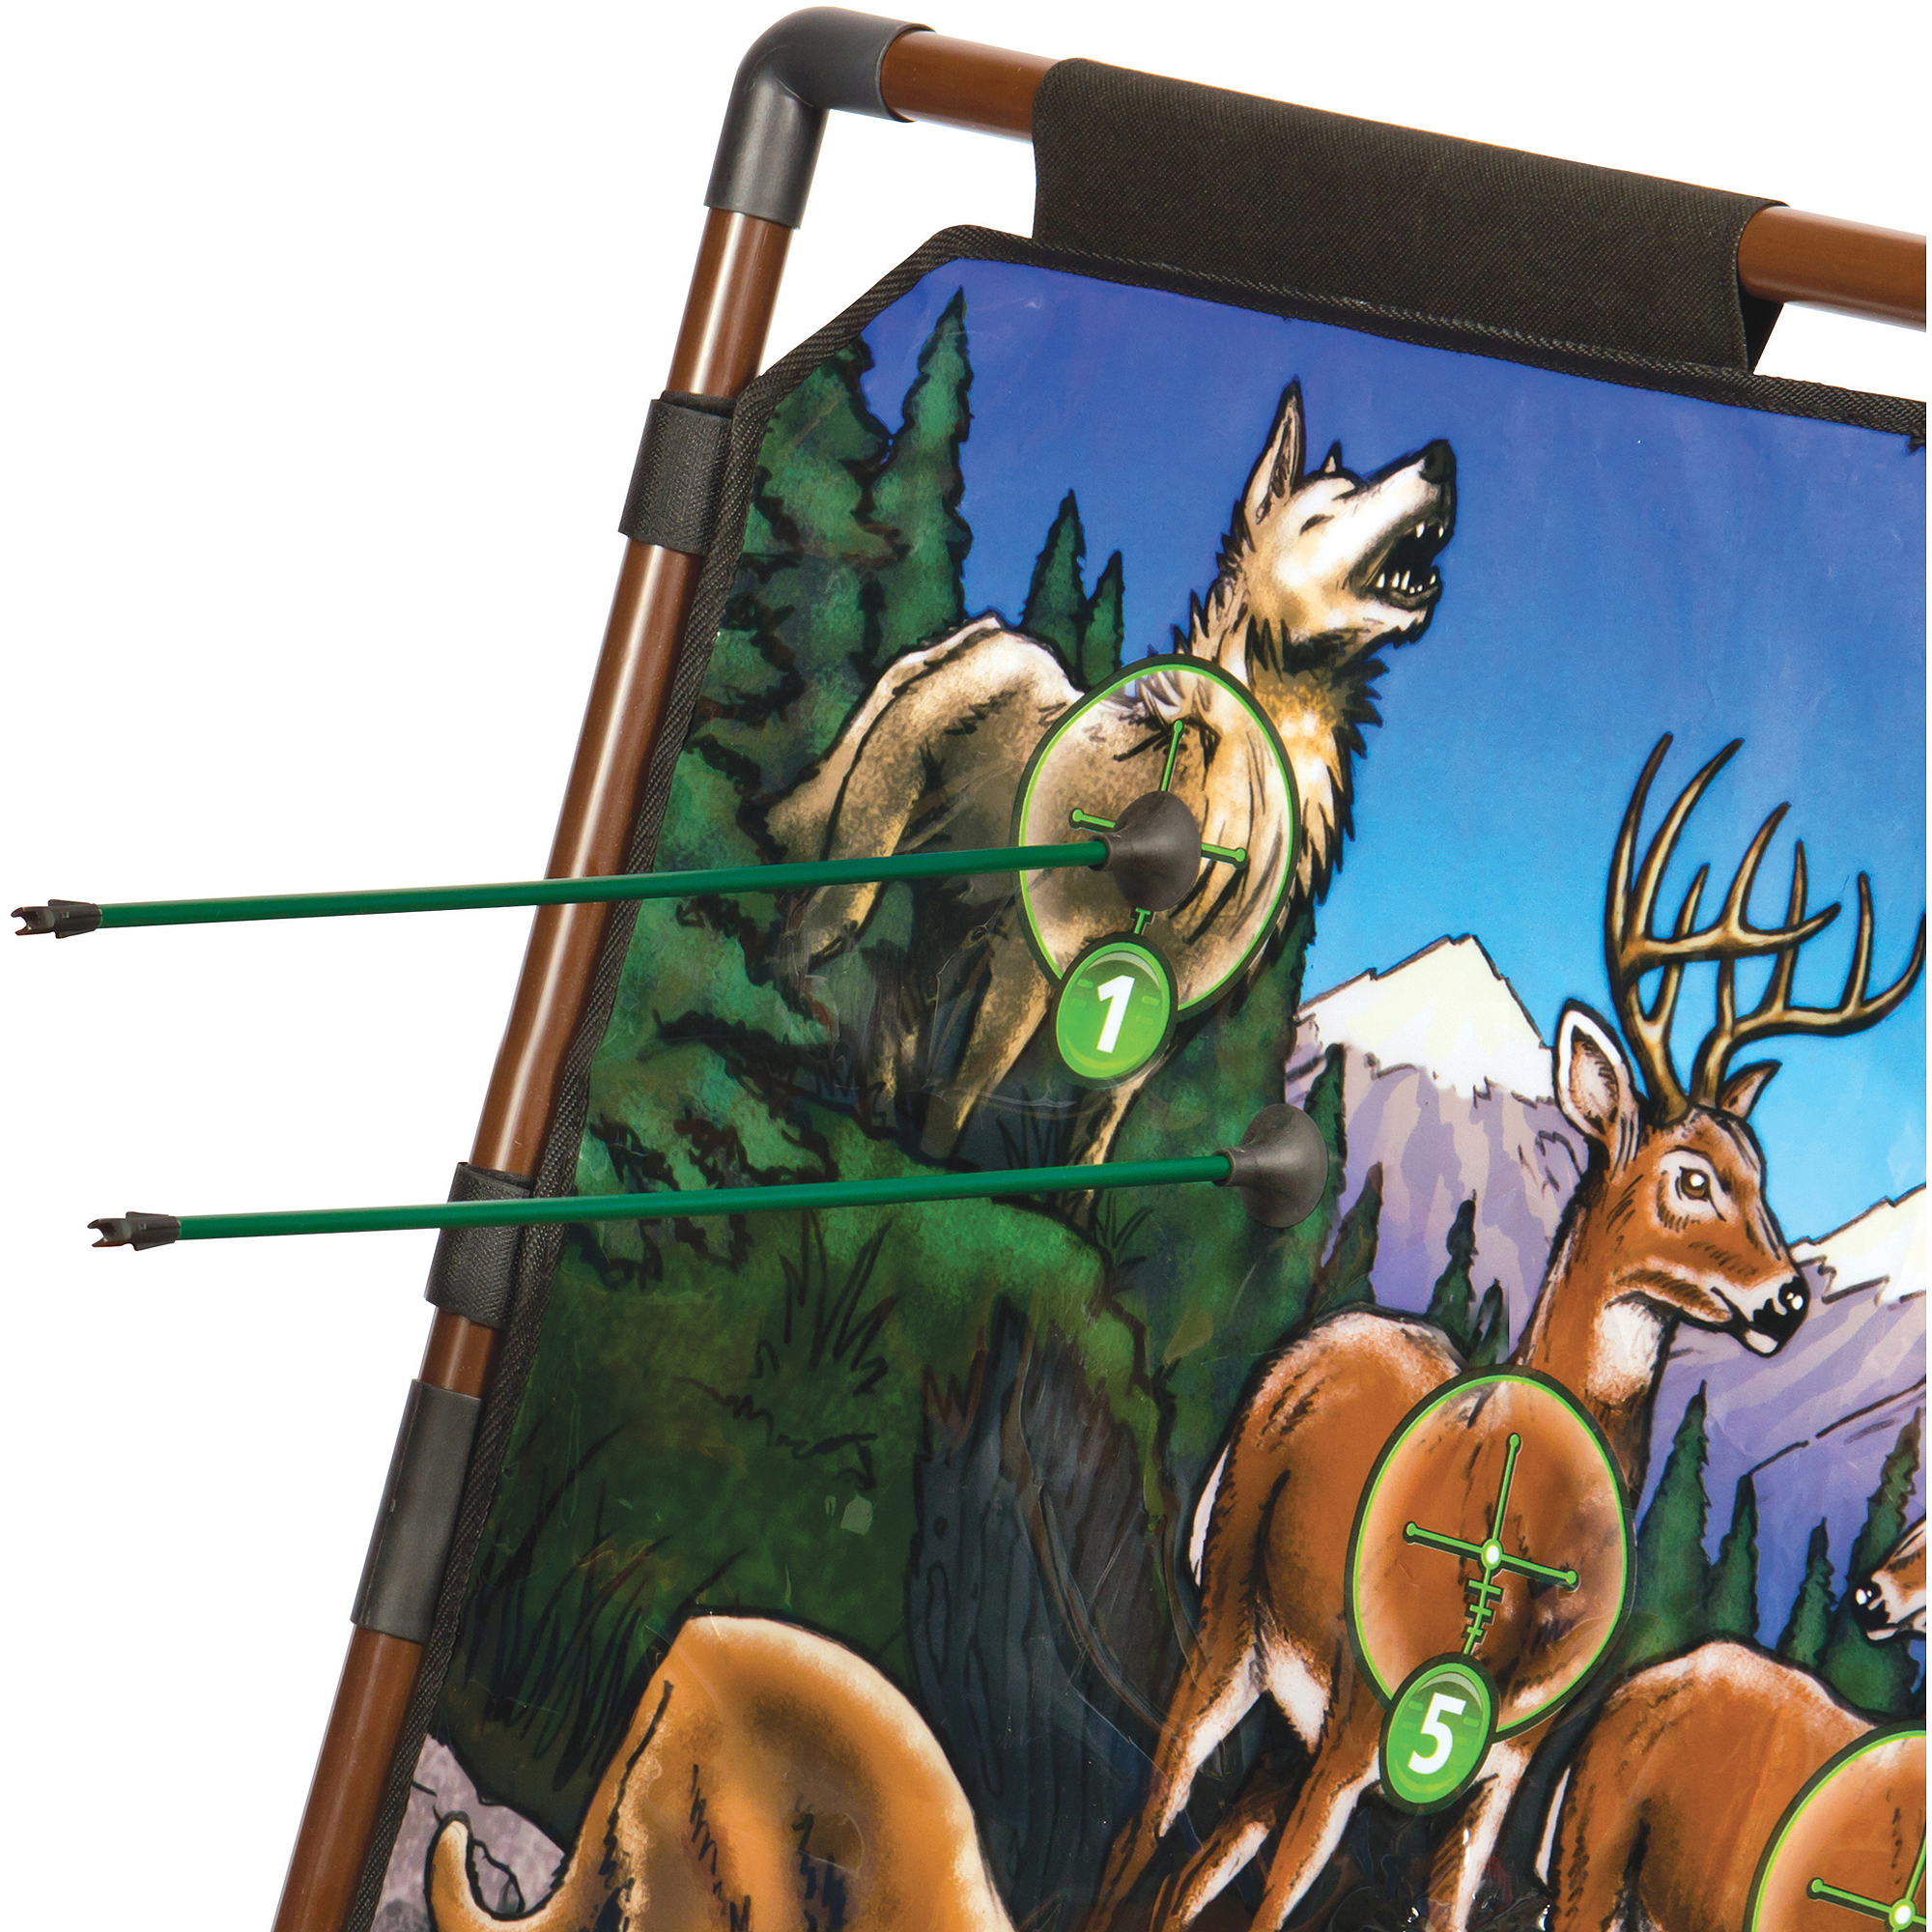 Majik Accurate Aim Hunting Archery Trainer - image 4 of 6